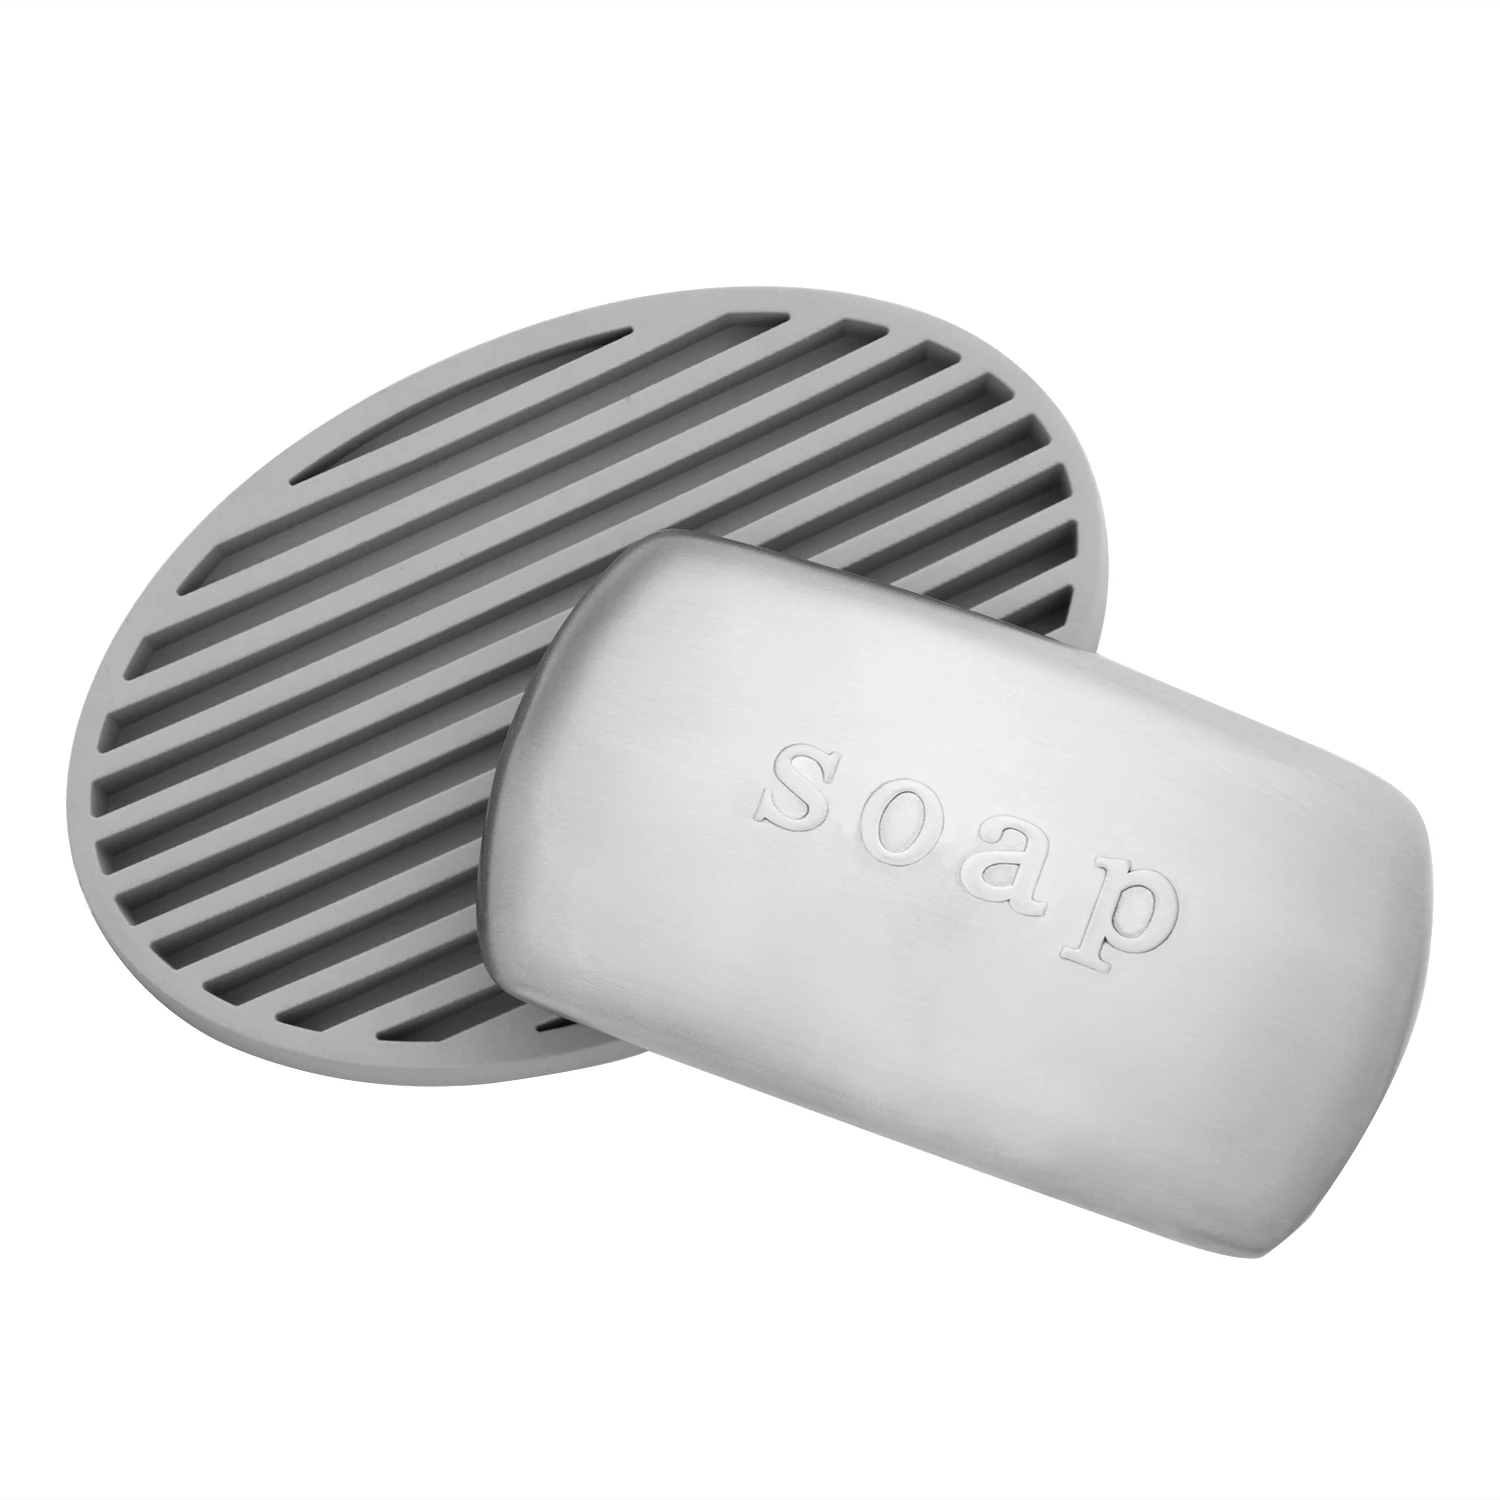 Magic soap odour stainless steel durable and ecological garlic, onion, fish